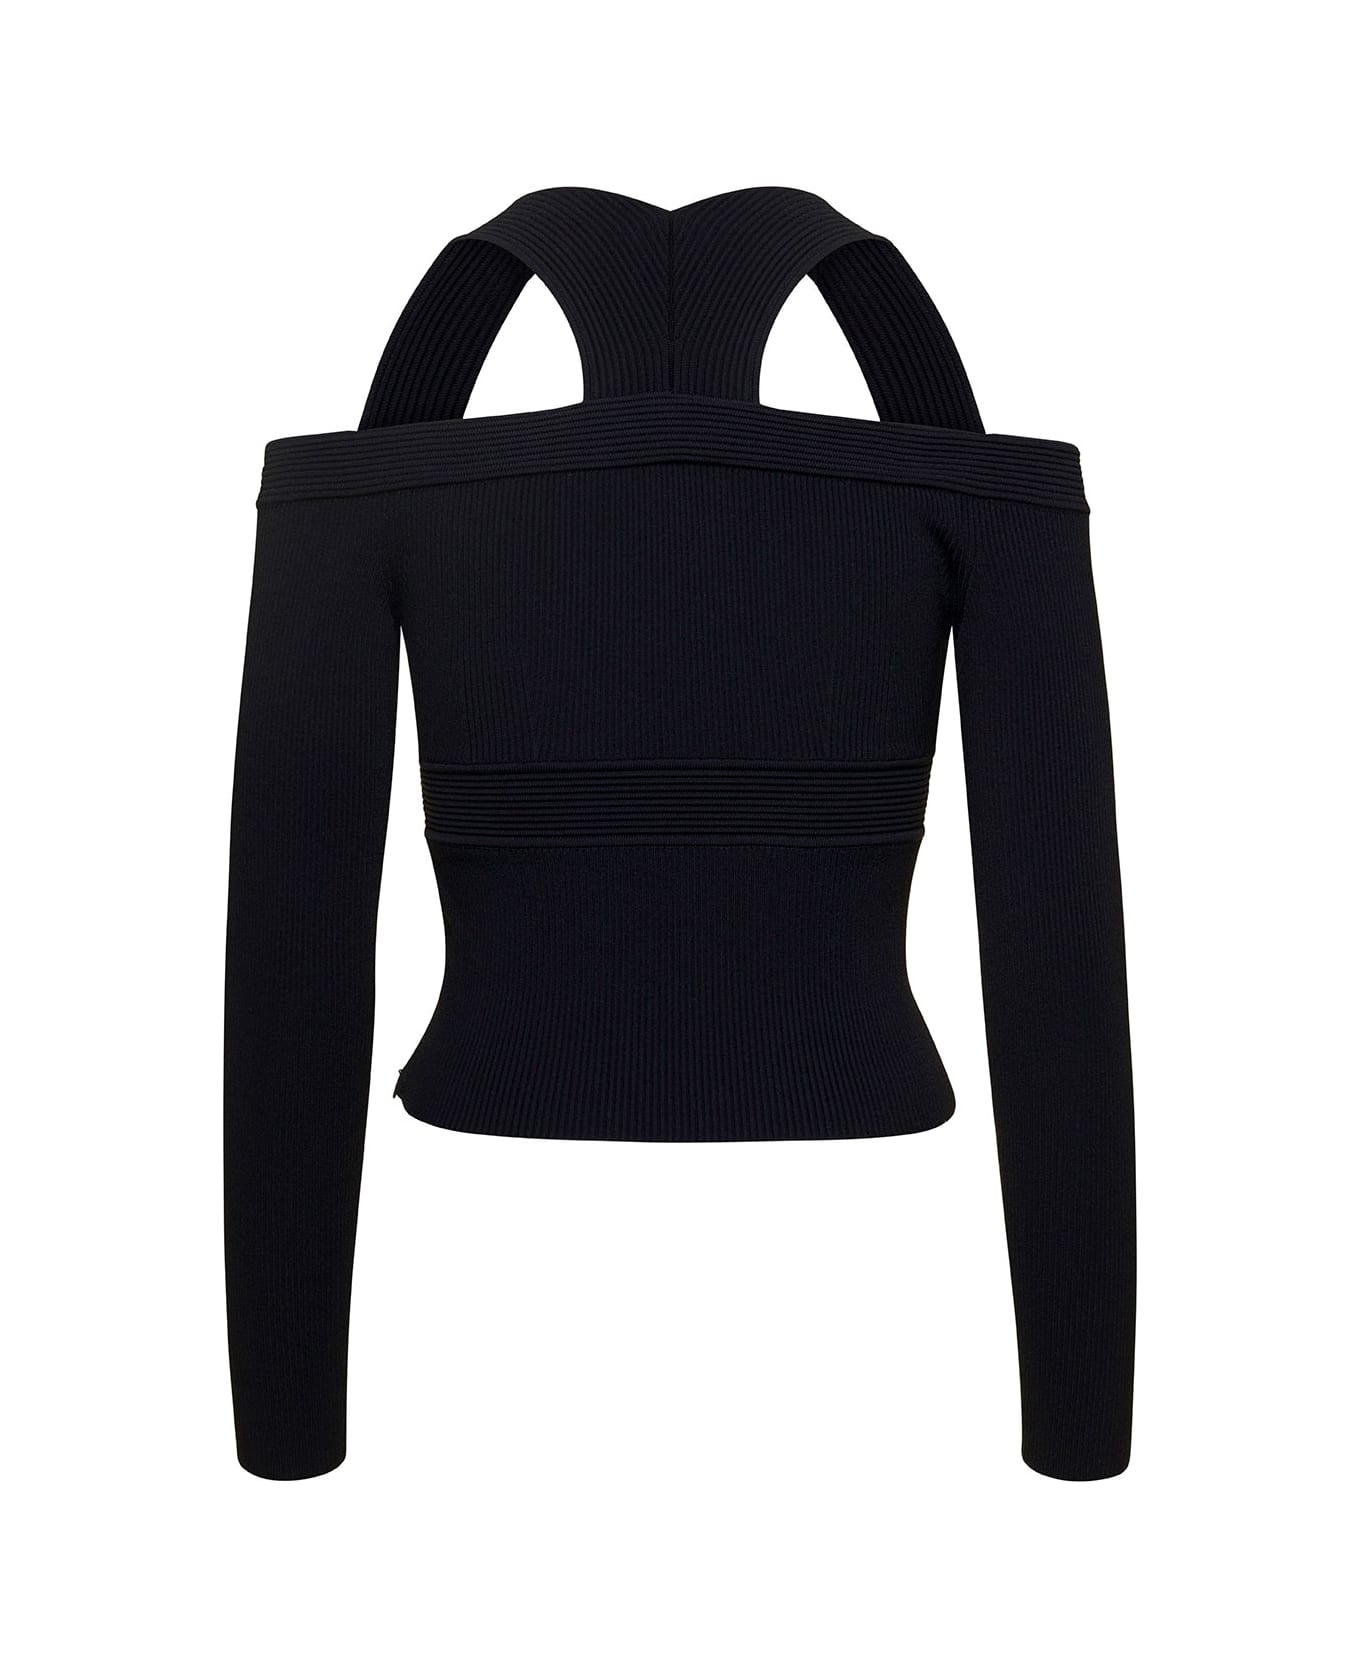 Alexander McQueen Cropped Top With Cut-out Details - Black トップス